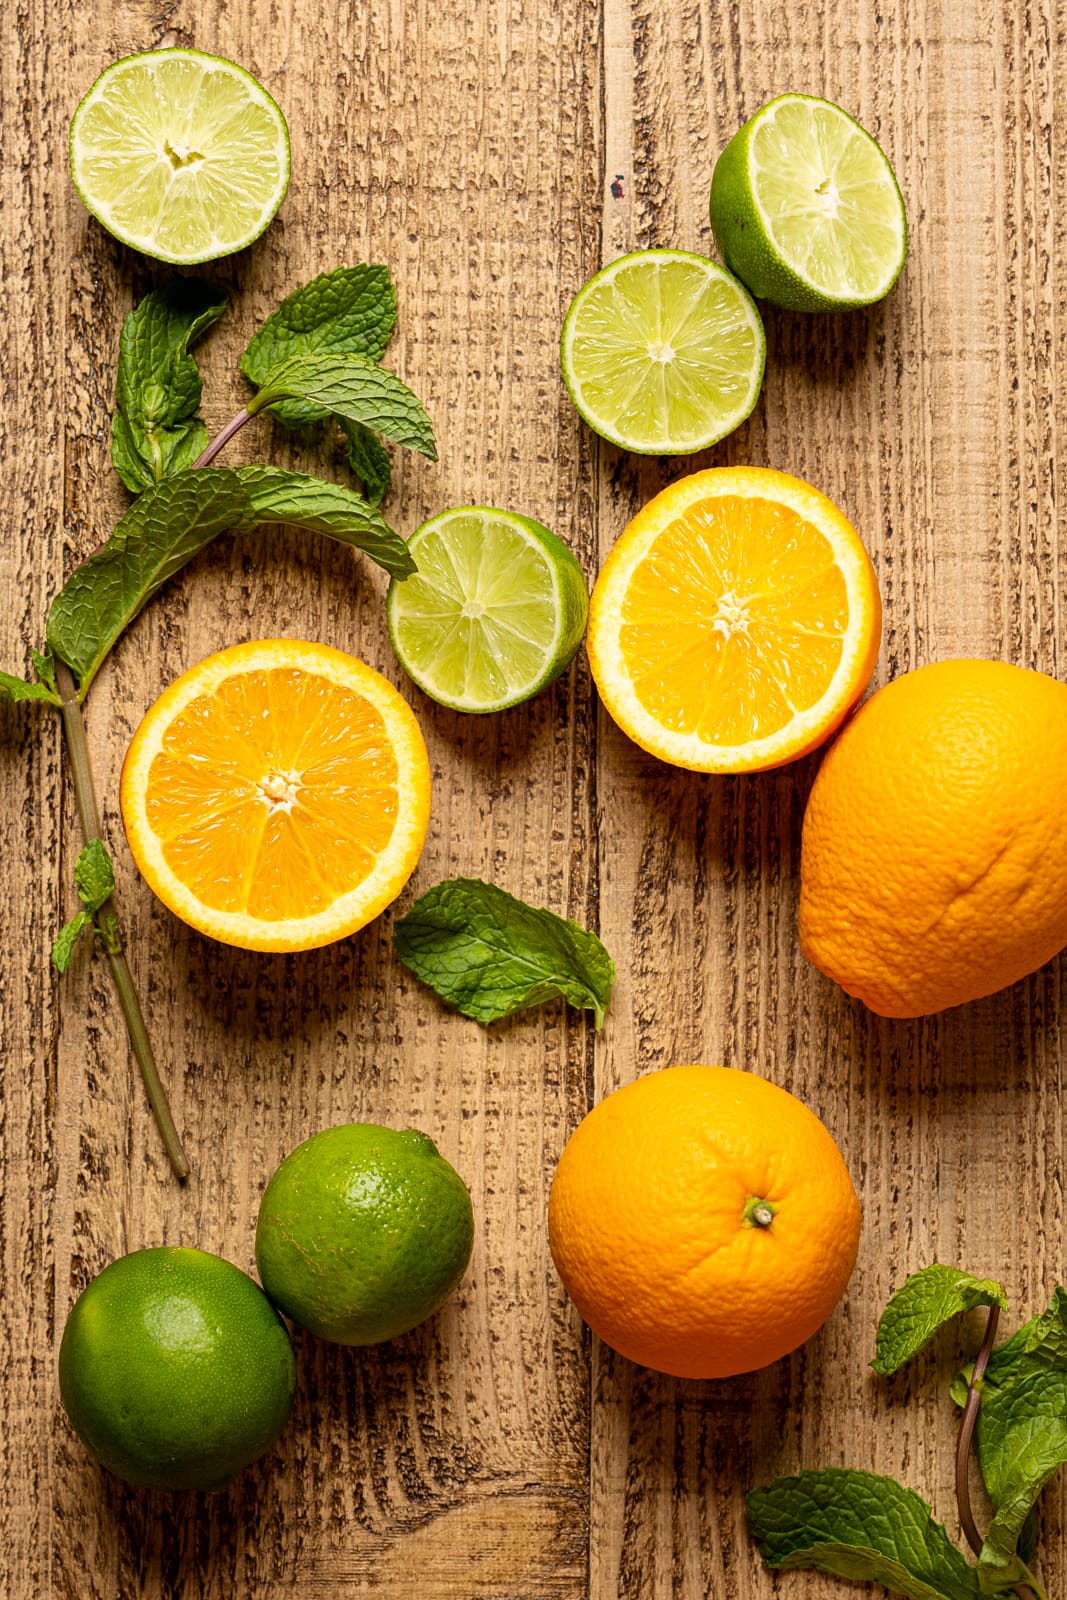 Slices of oranges, limes, and mint leaves, on a brown wood table.